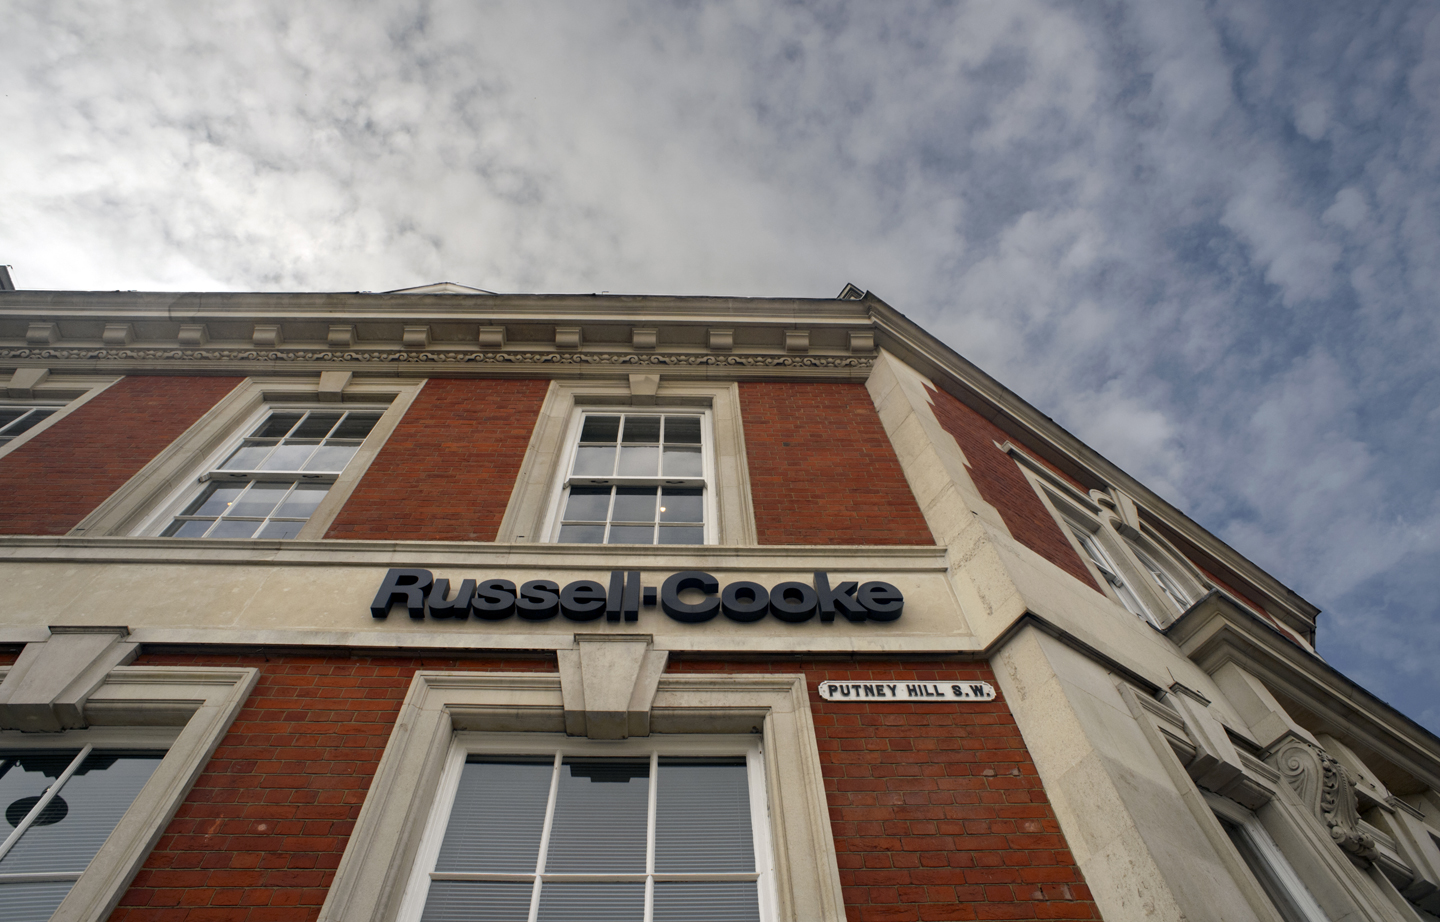 Russell Cooke Putney London 2